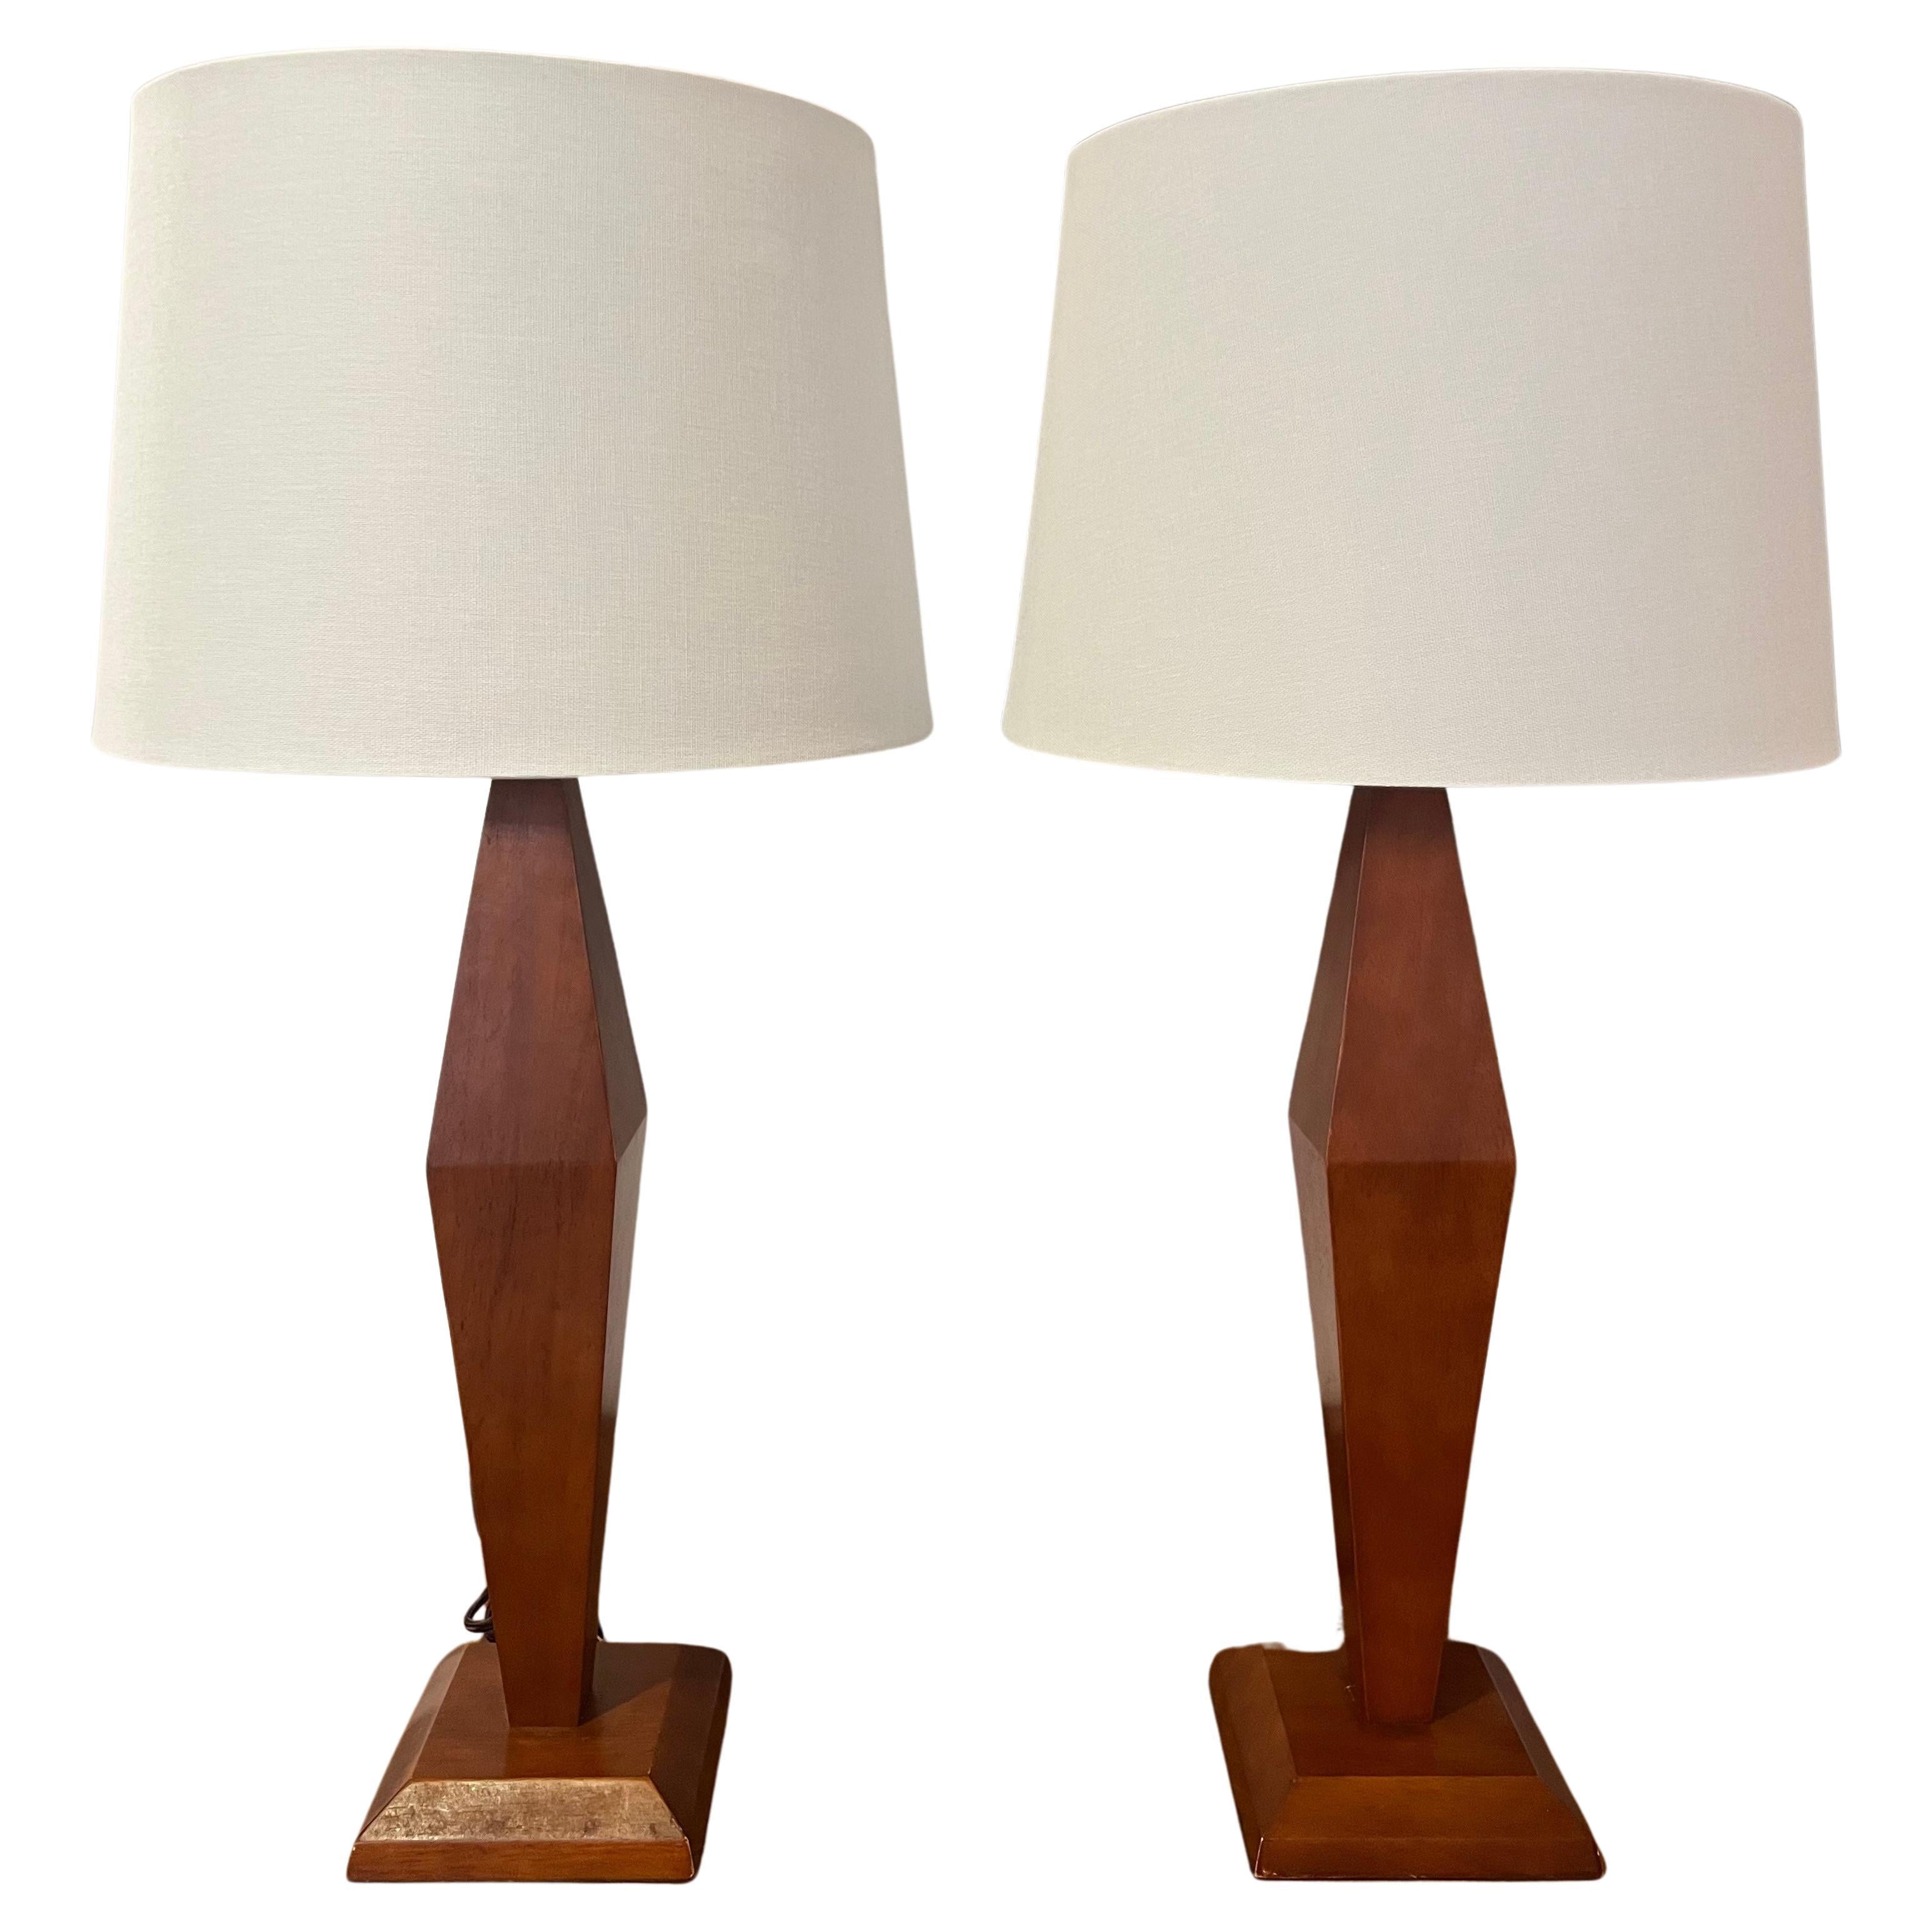 Pair of American Art Deco 1940s Wood Table Lamps For Sale